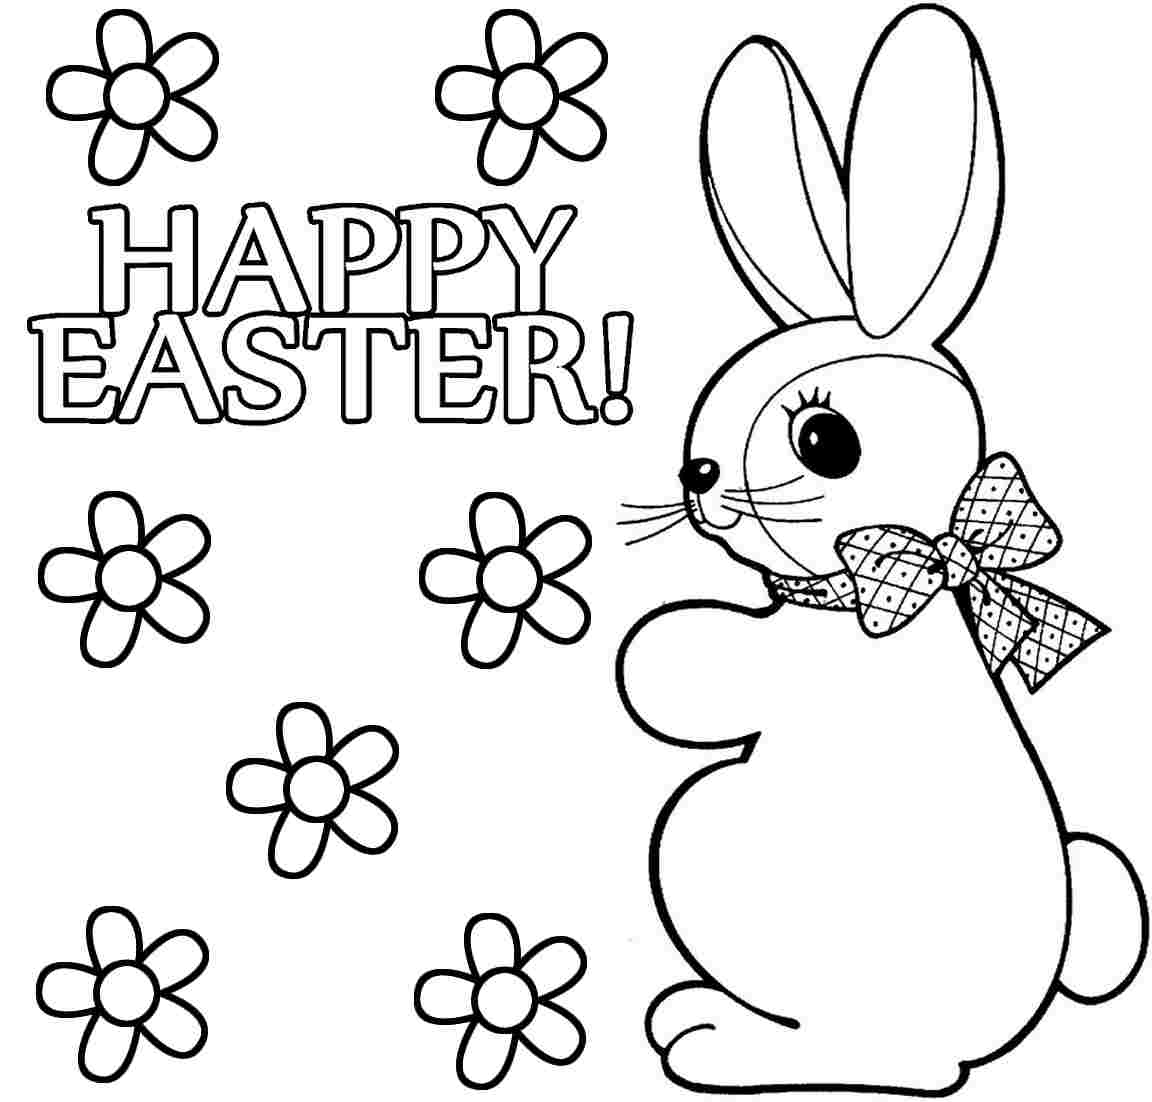 Free Bunny Coloring Pages Free Printable Download Free Bunny Coloring